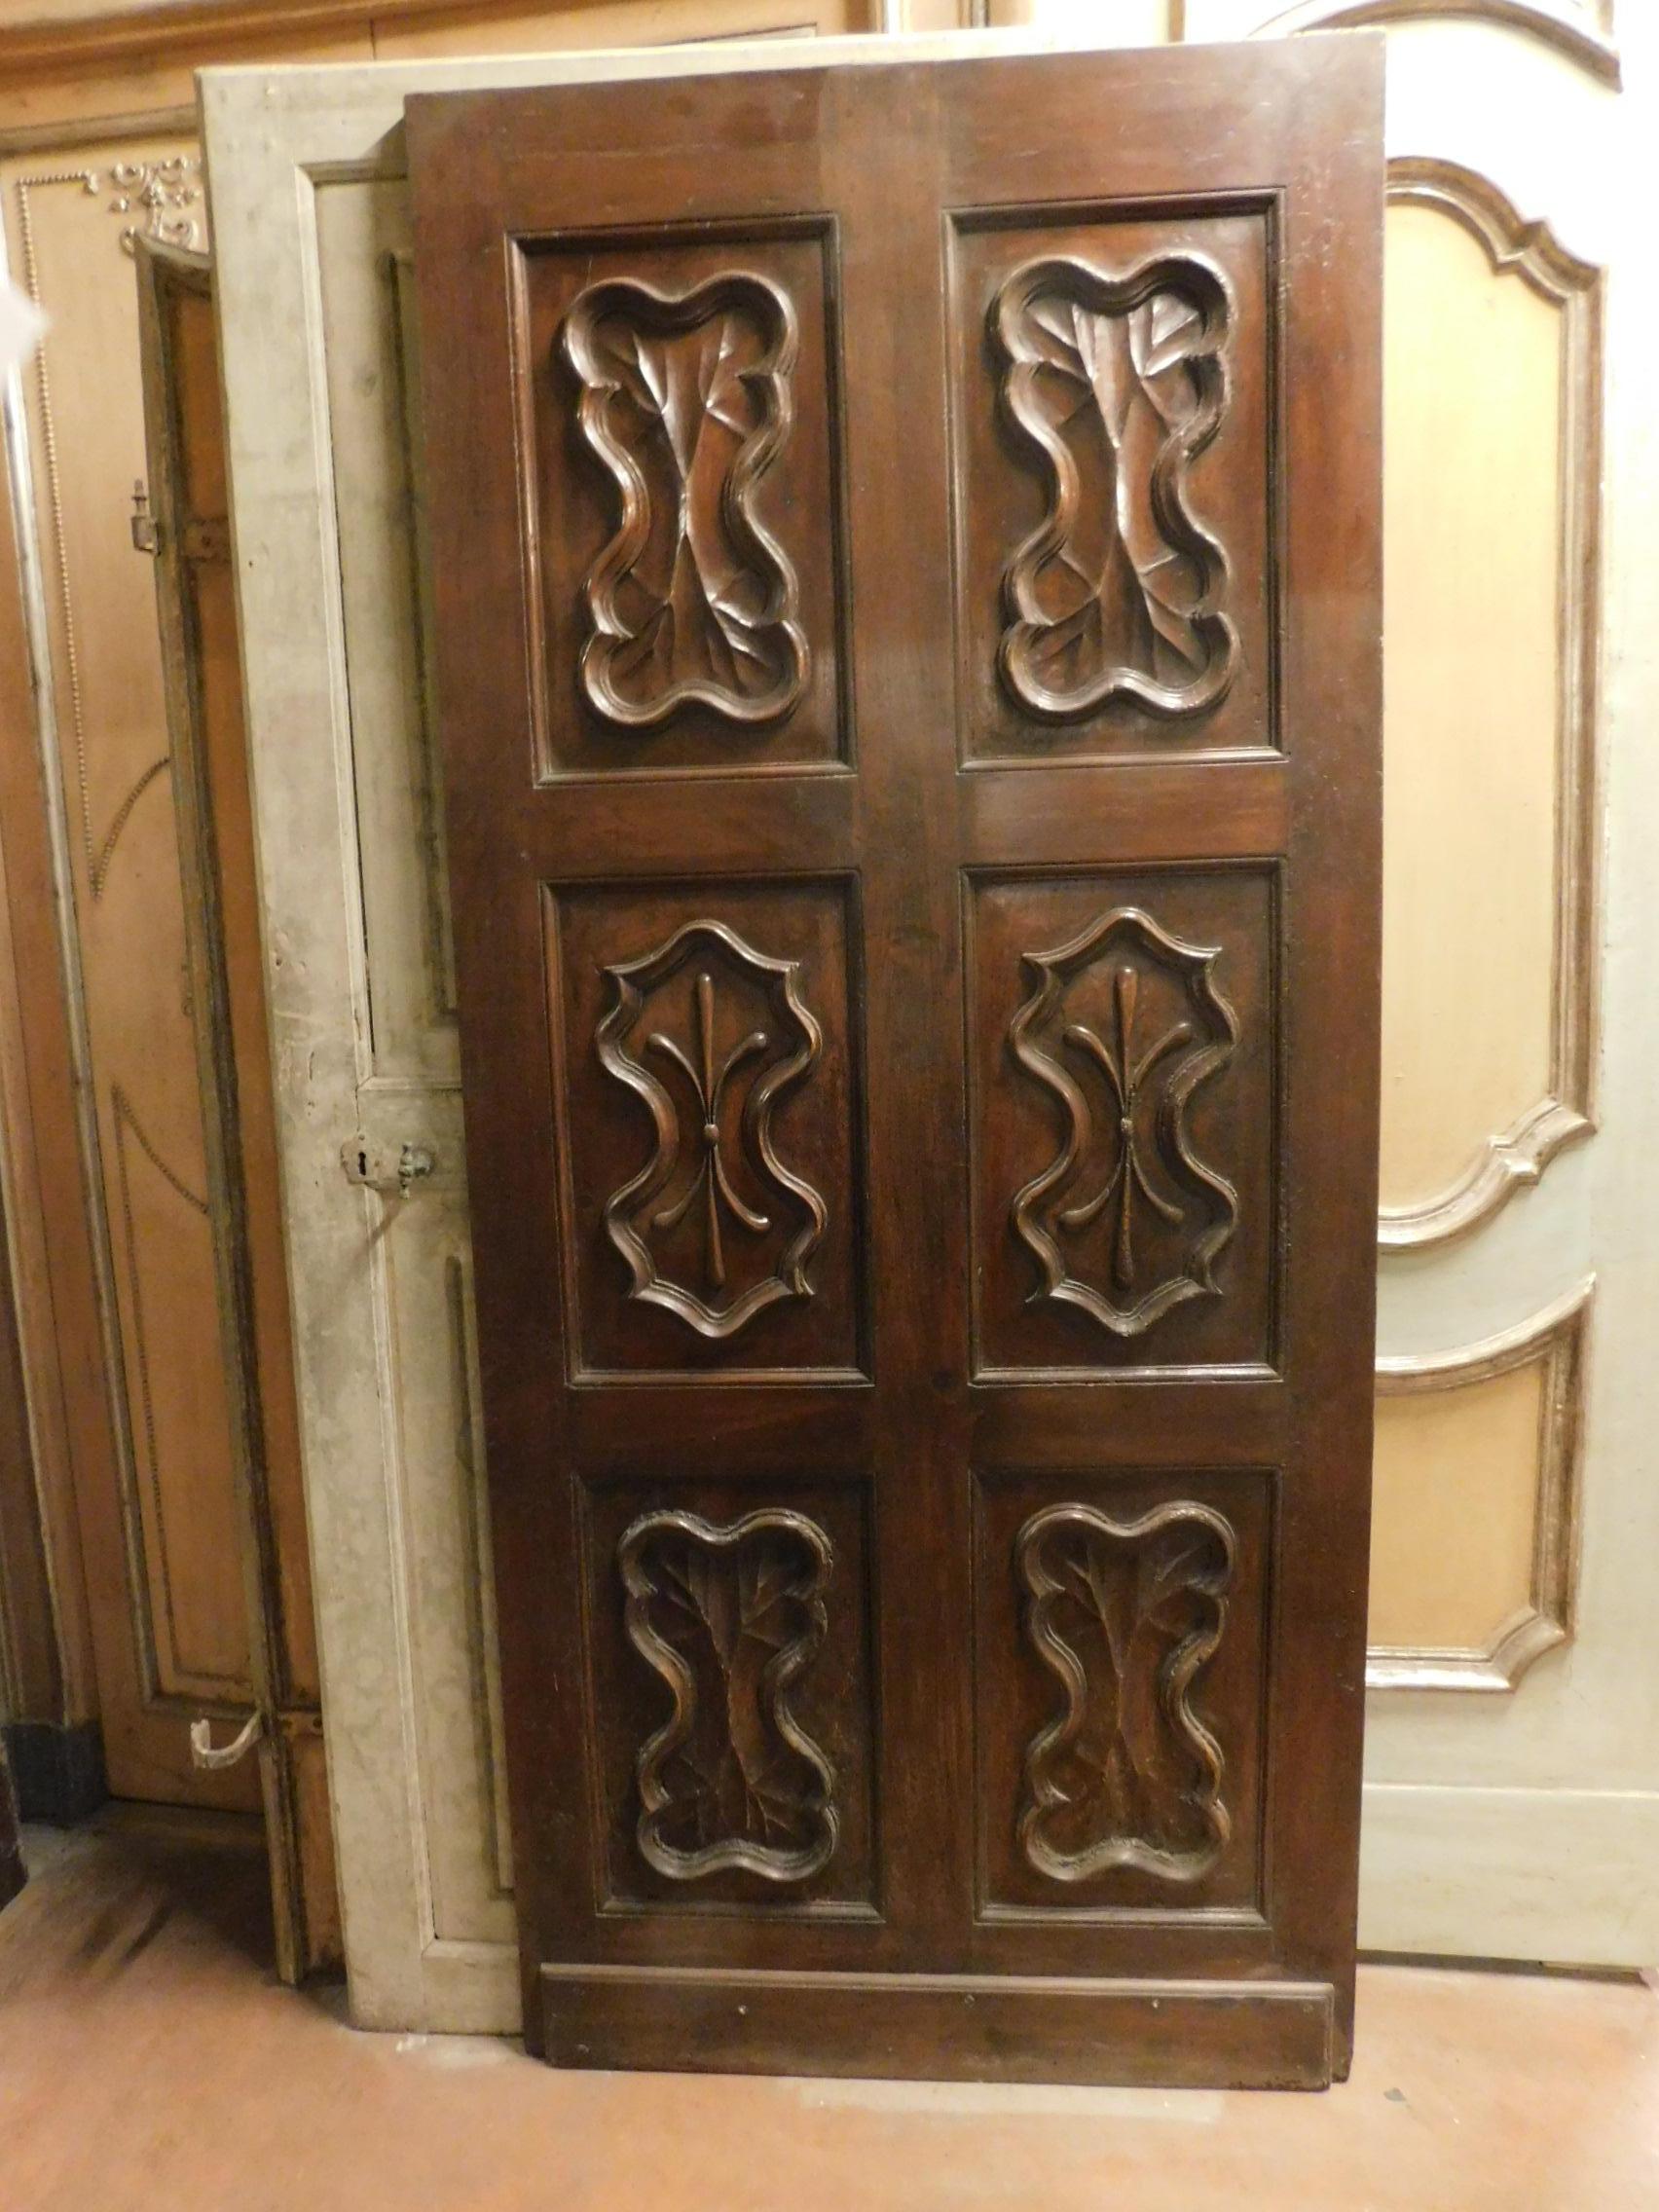 Antico carries Italian walnut wood, sculpted in Genoa at the beginning of the 18th century, dark brown color, elegant charm of a beautiful interior door, still to be worked on, the restoration can be managed, pot time conditions, smooth back to wax.